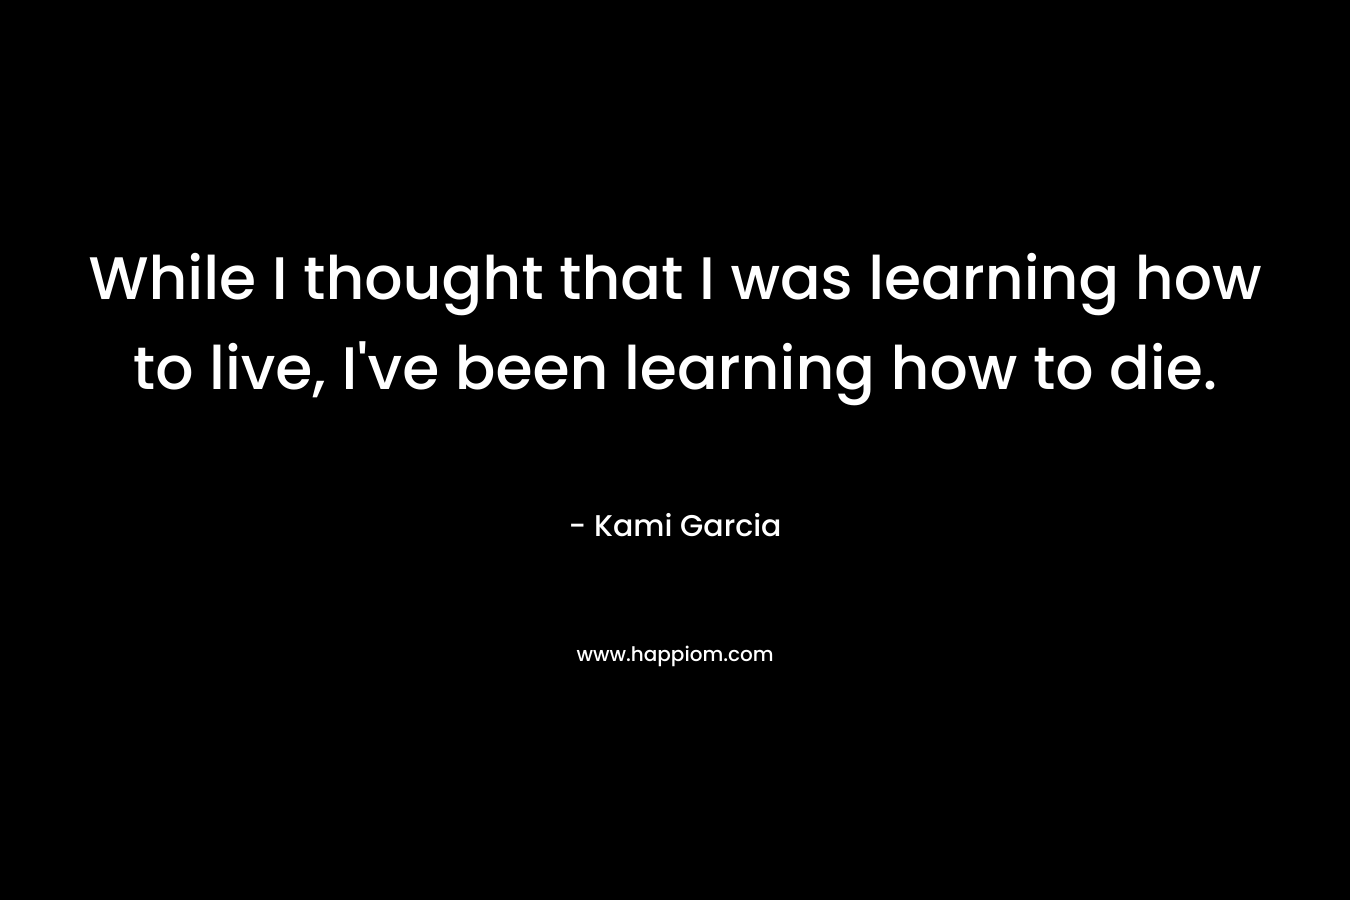 While I thought that I was learning how to live, I’ve been learning how to die. – Kami Garcia